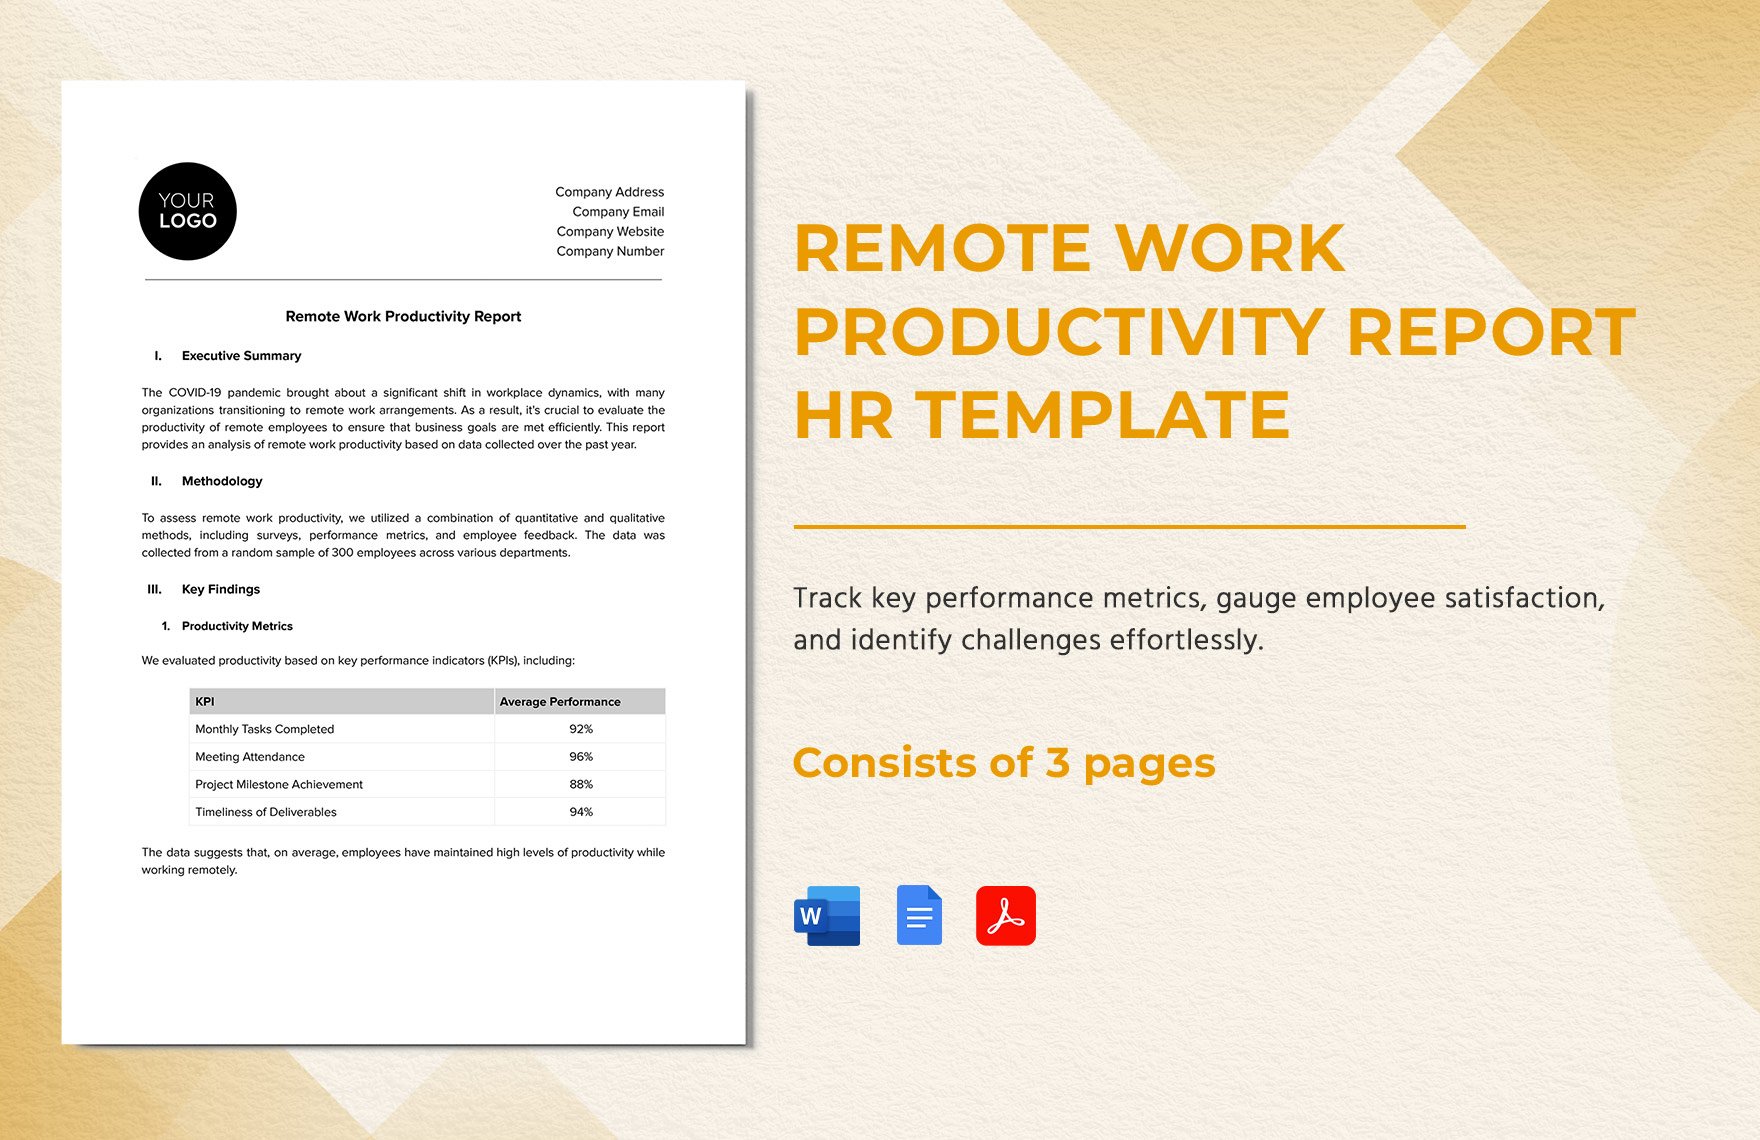 Remote Work Productivity Report HR Template